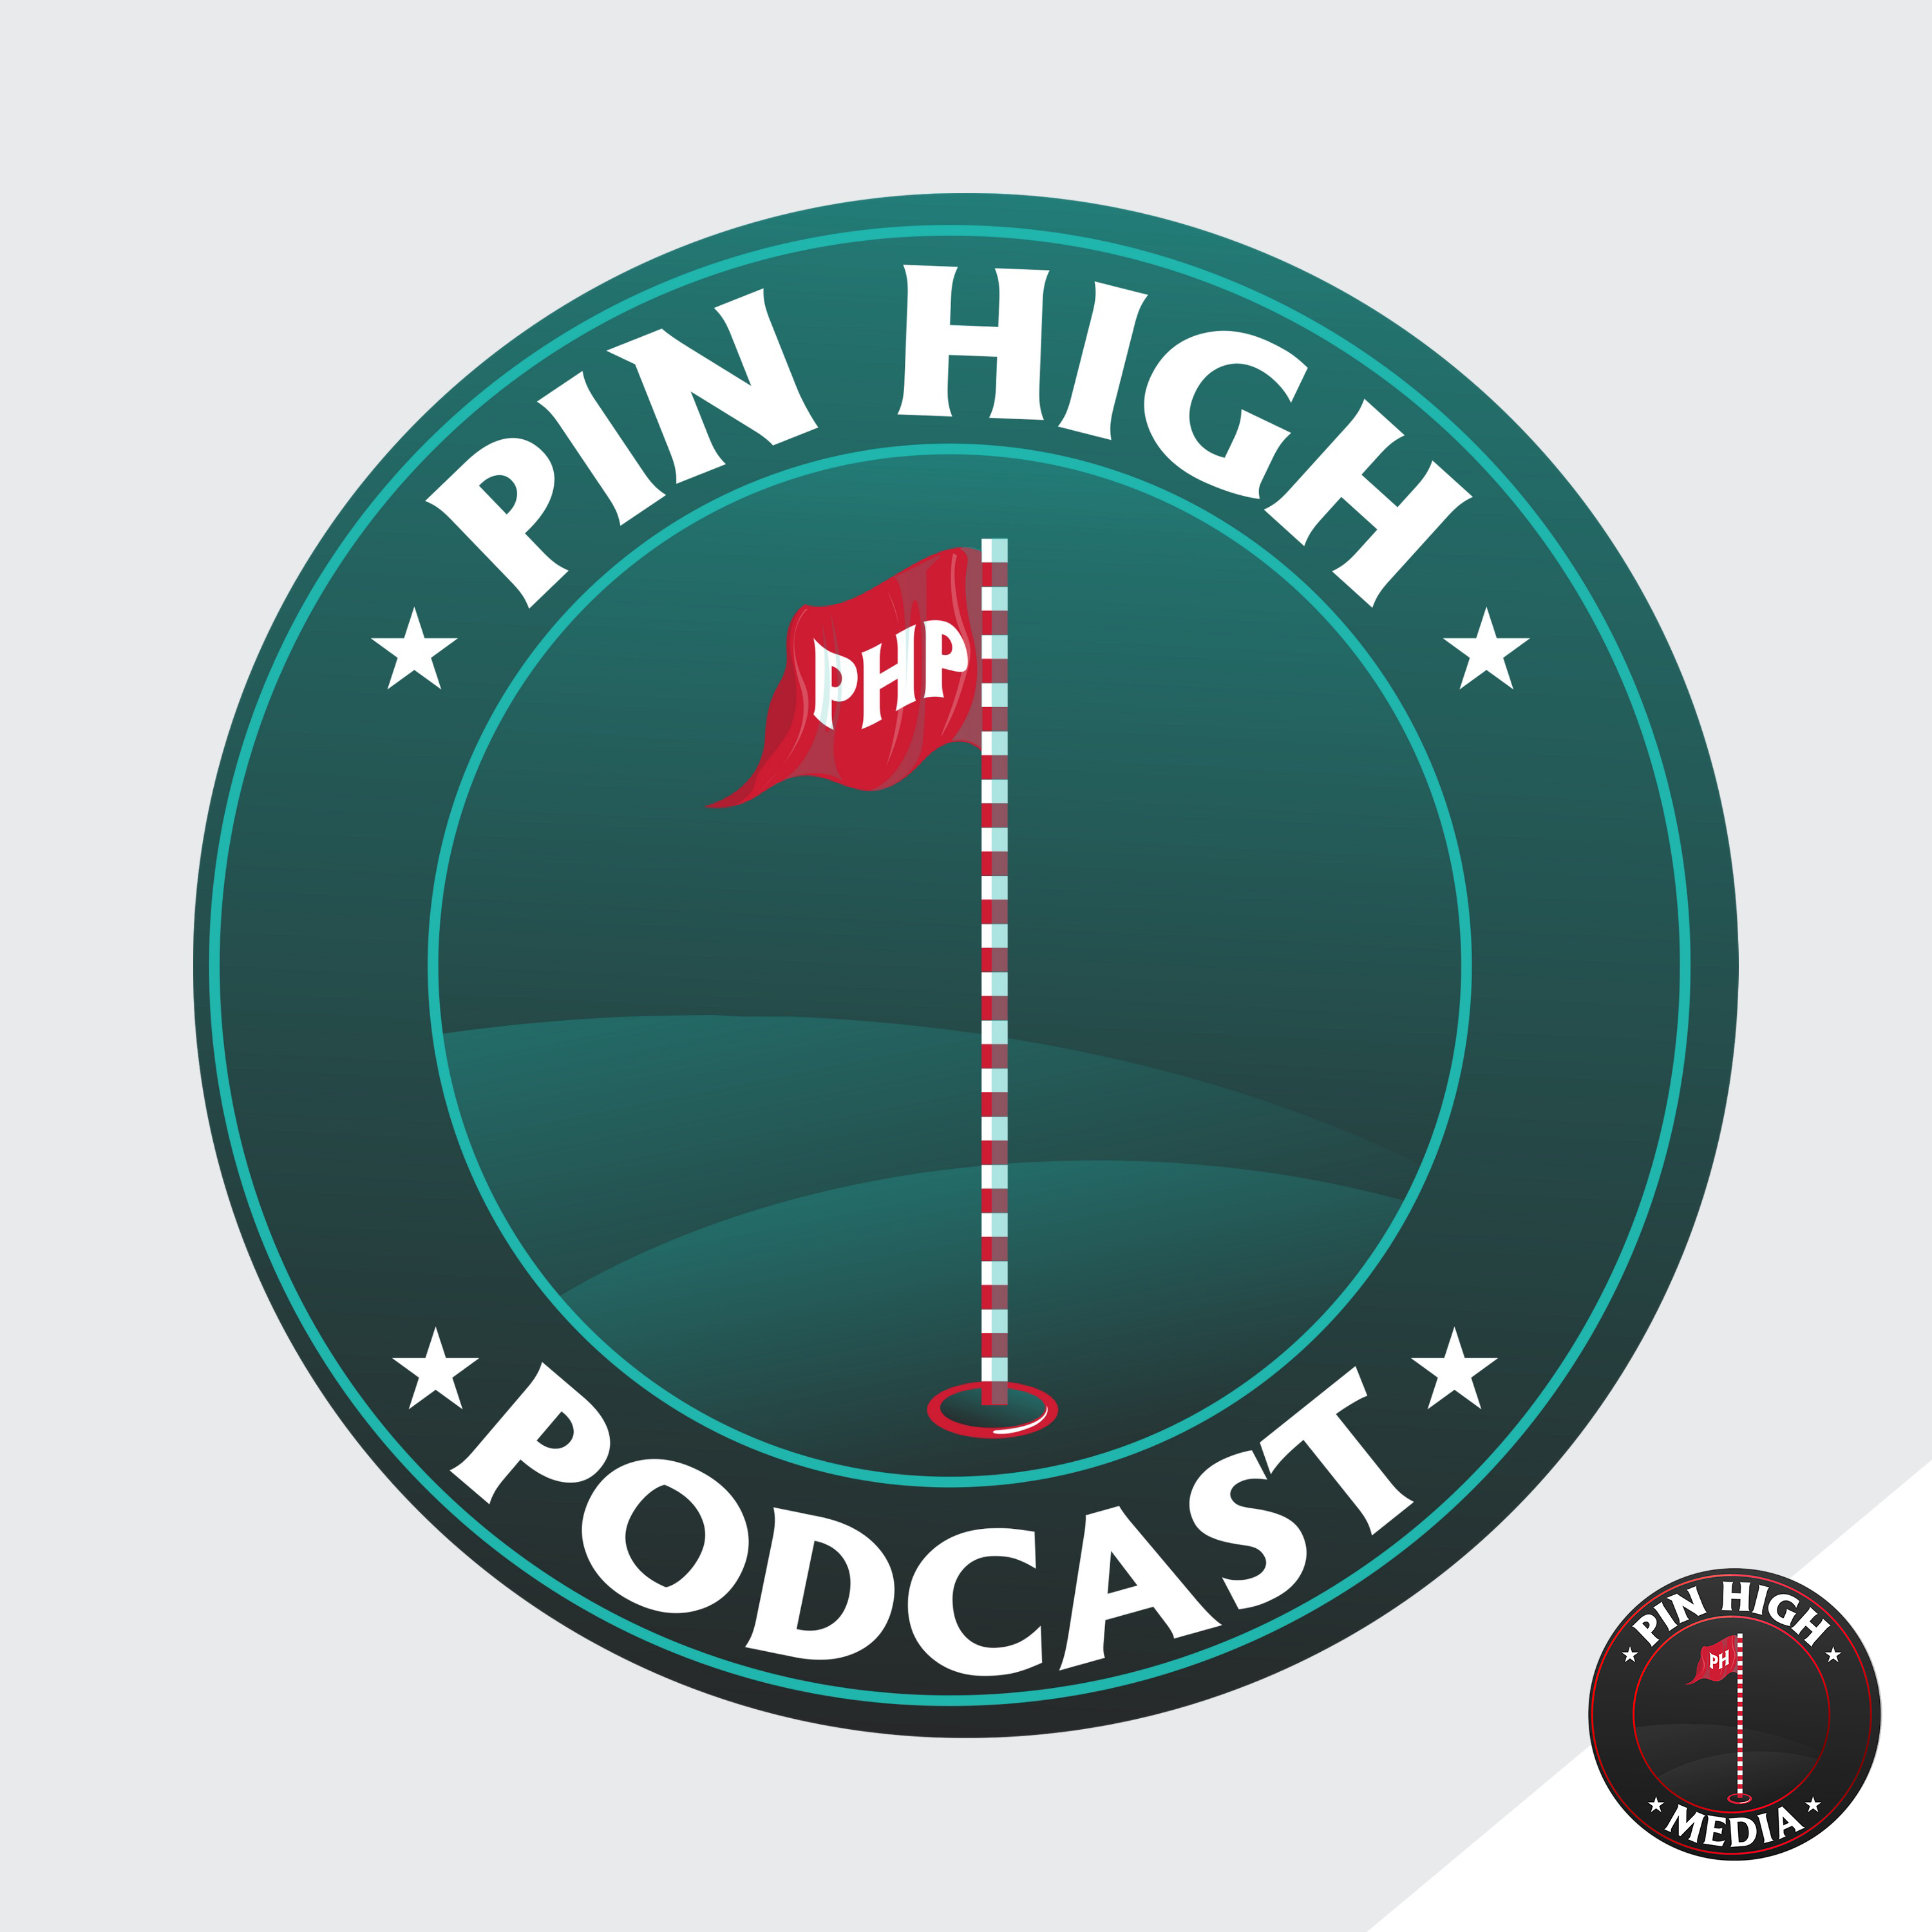 Pin High Podcast Ep. 122: This Has Never Happened on TOUR Until Now!